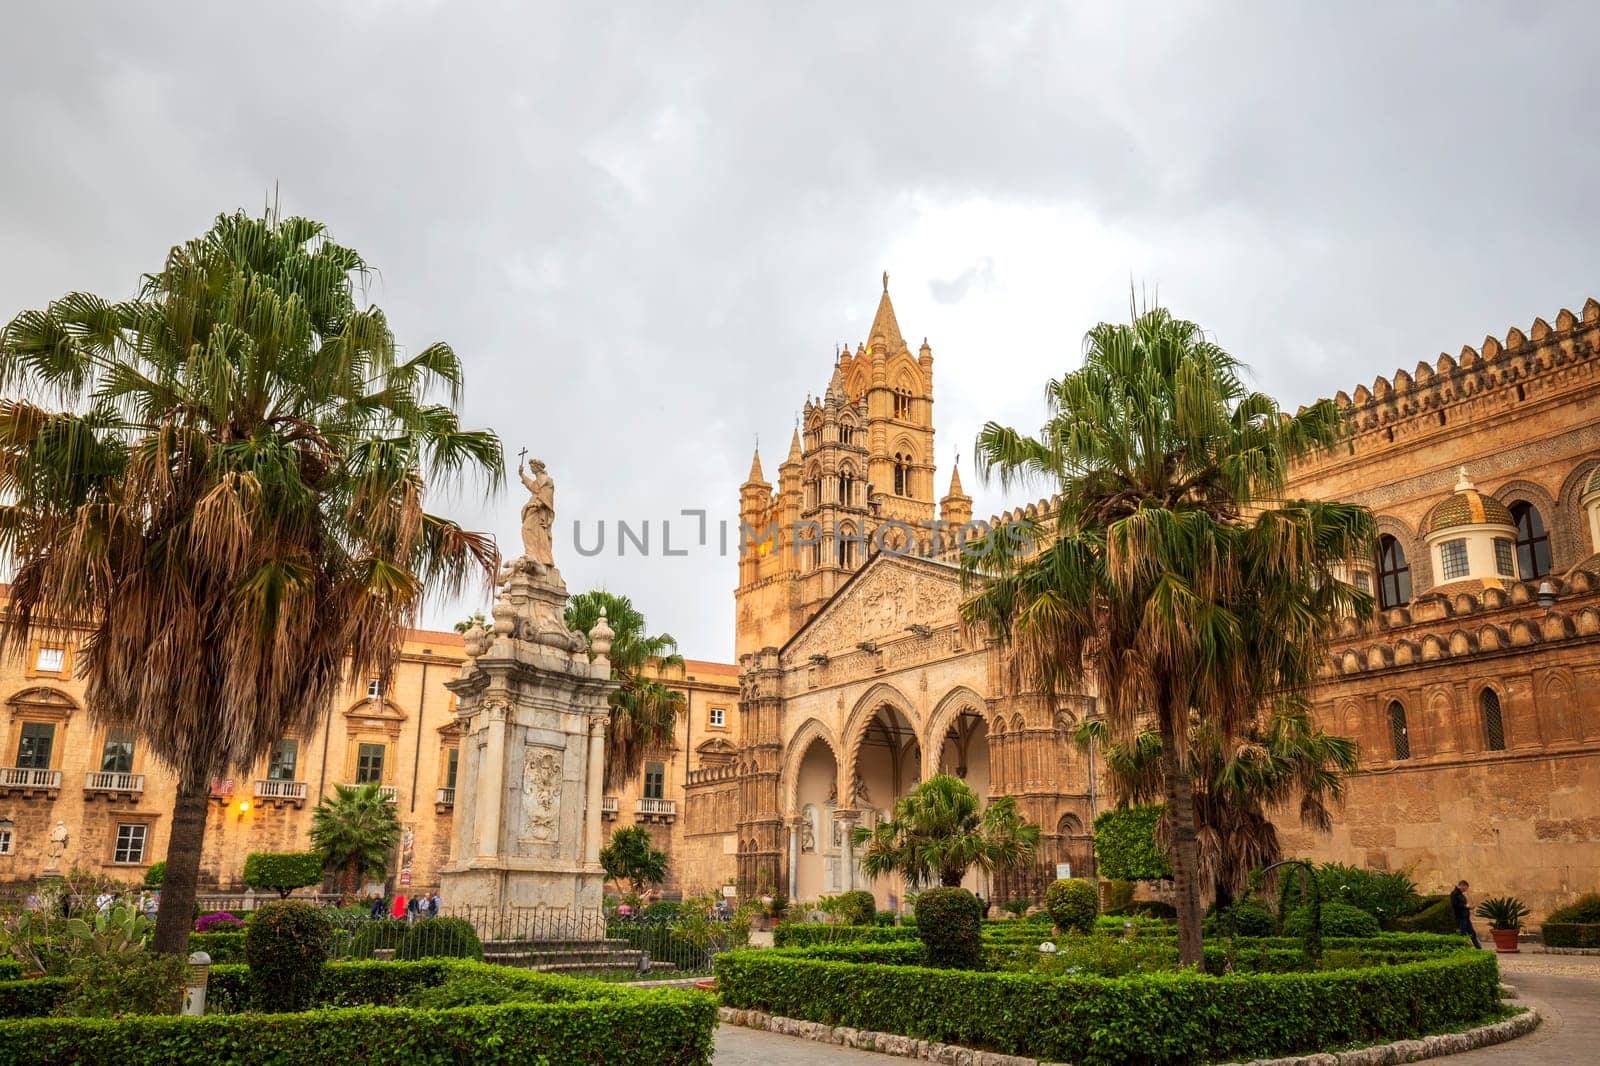 Cityscape image of the famous Palermo Cathedral in Palermo, Italy by EdVal